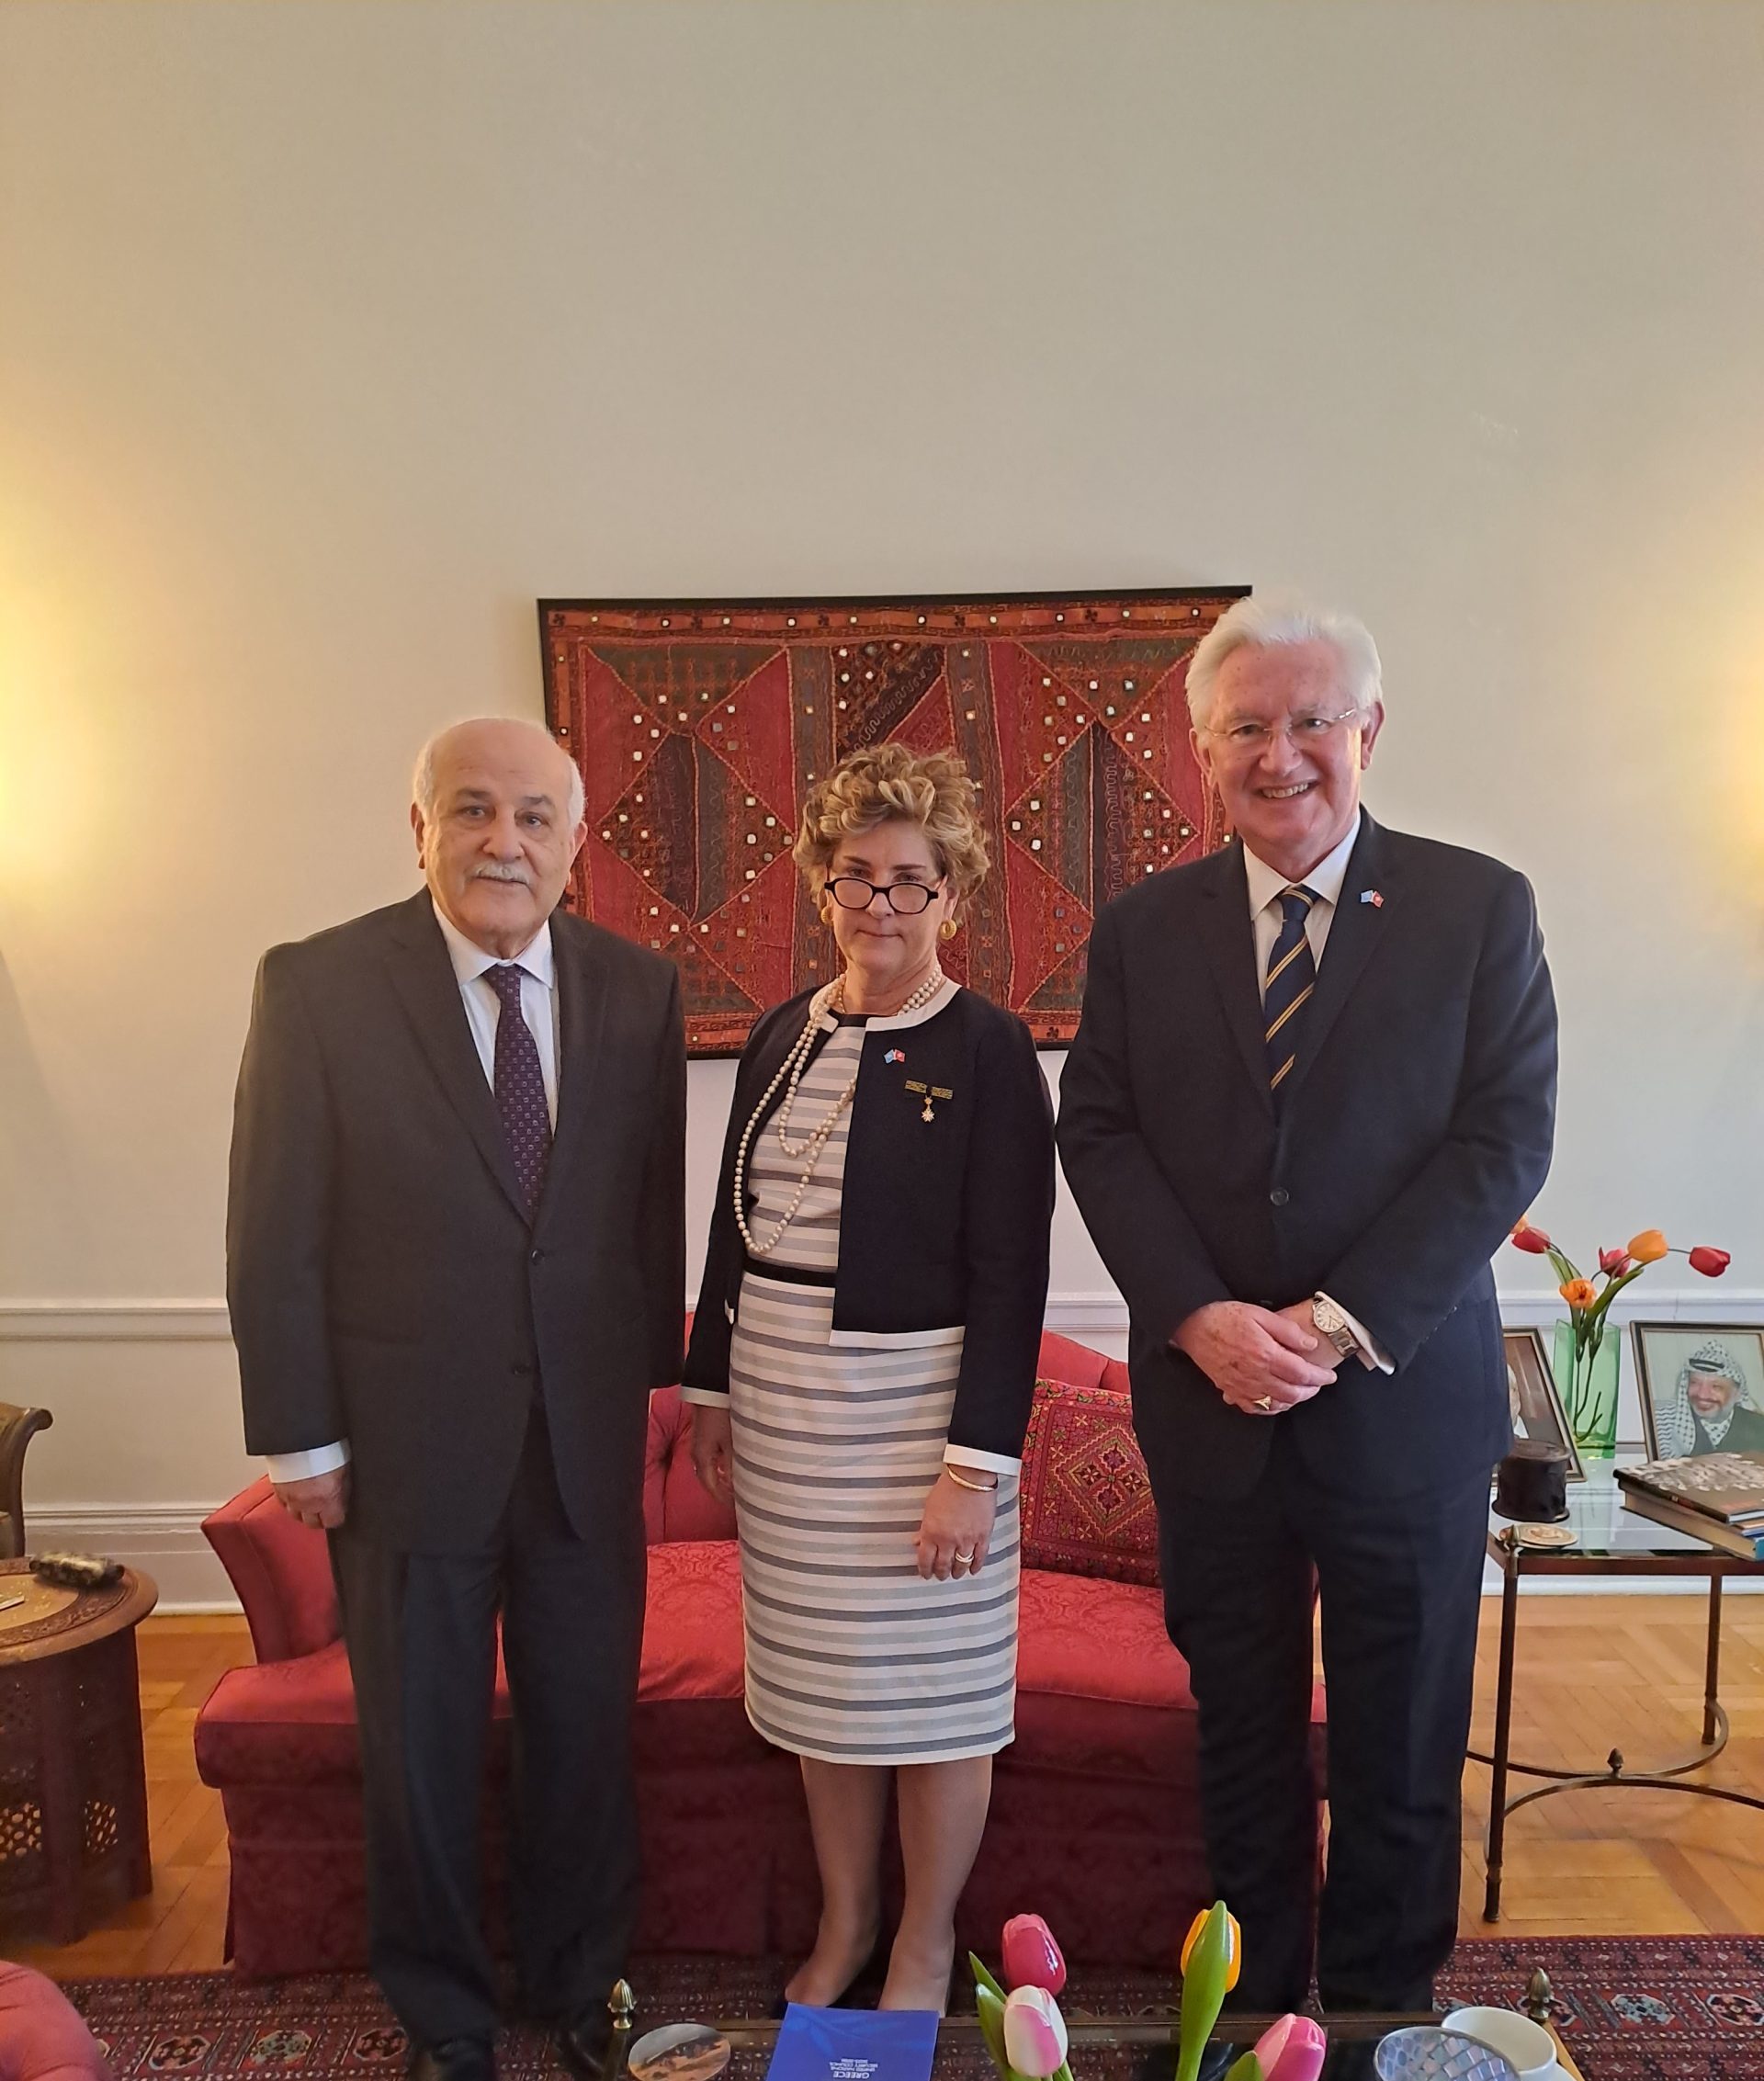 Ambassador Beresford-Hill and Ambassador Bowe are Welcomed by the Permanent Representative of the State of Palestine, H.E. Mr. Riyad Mansour